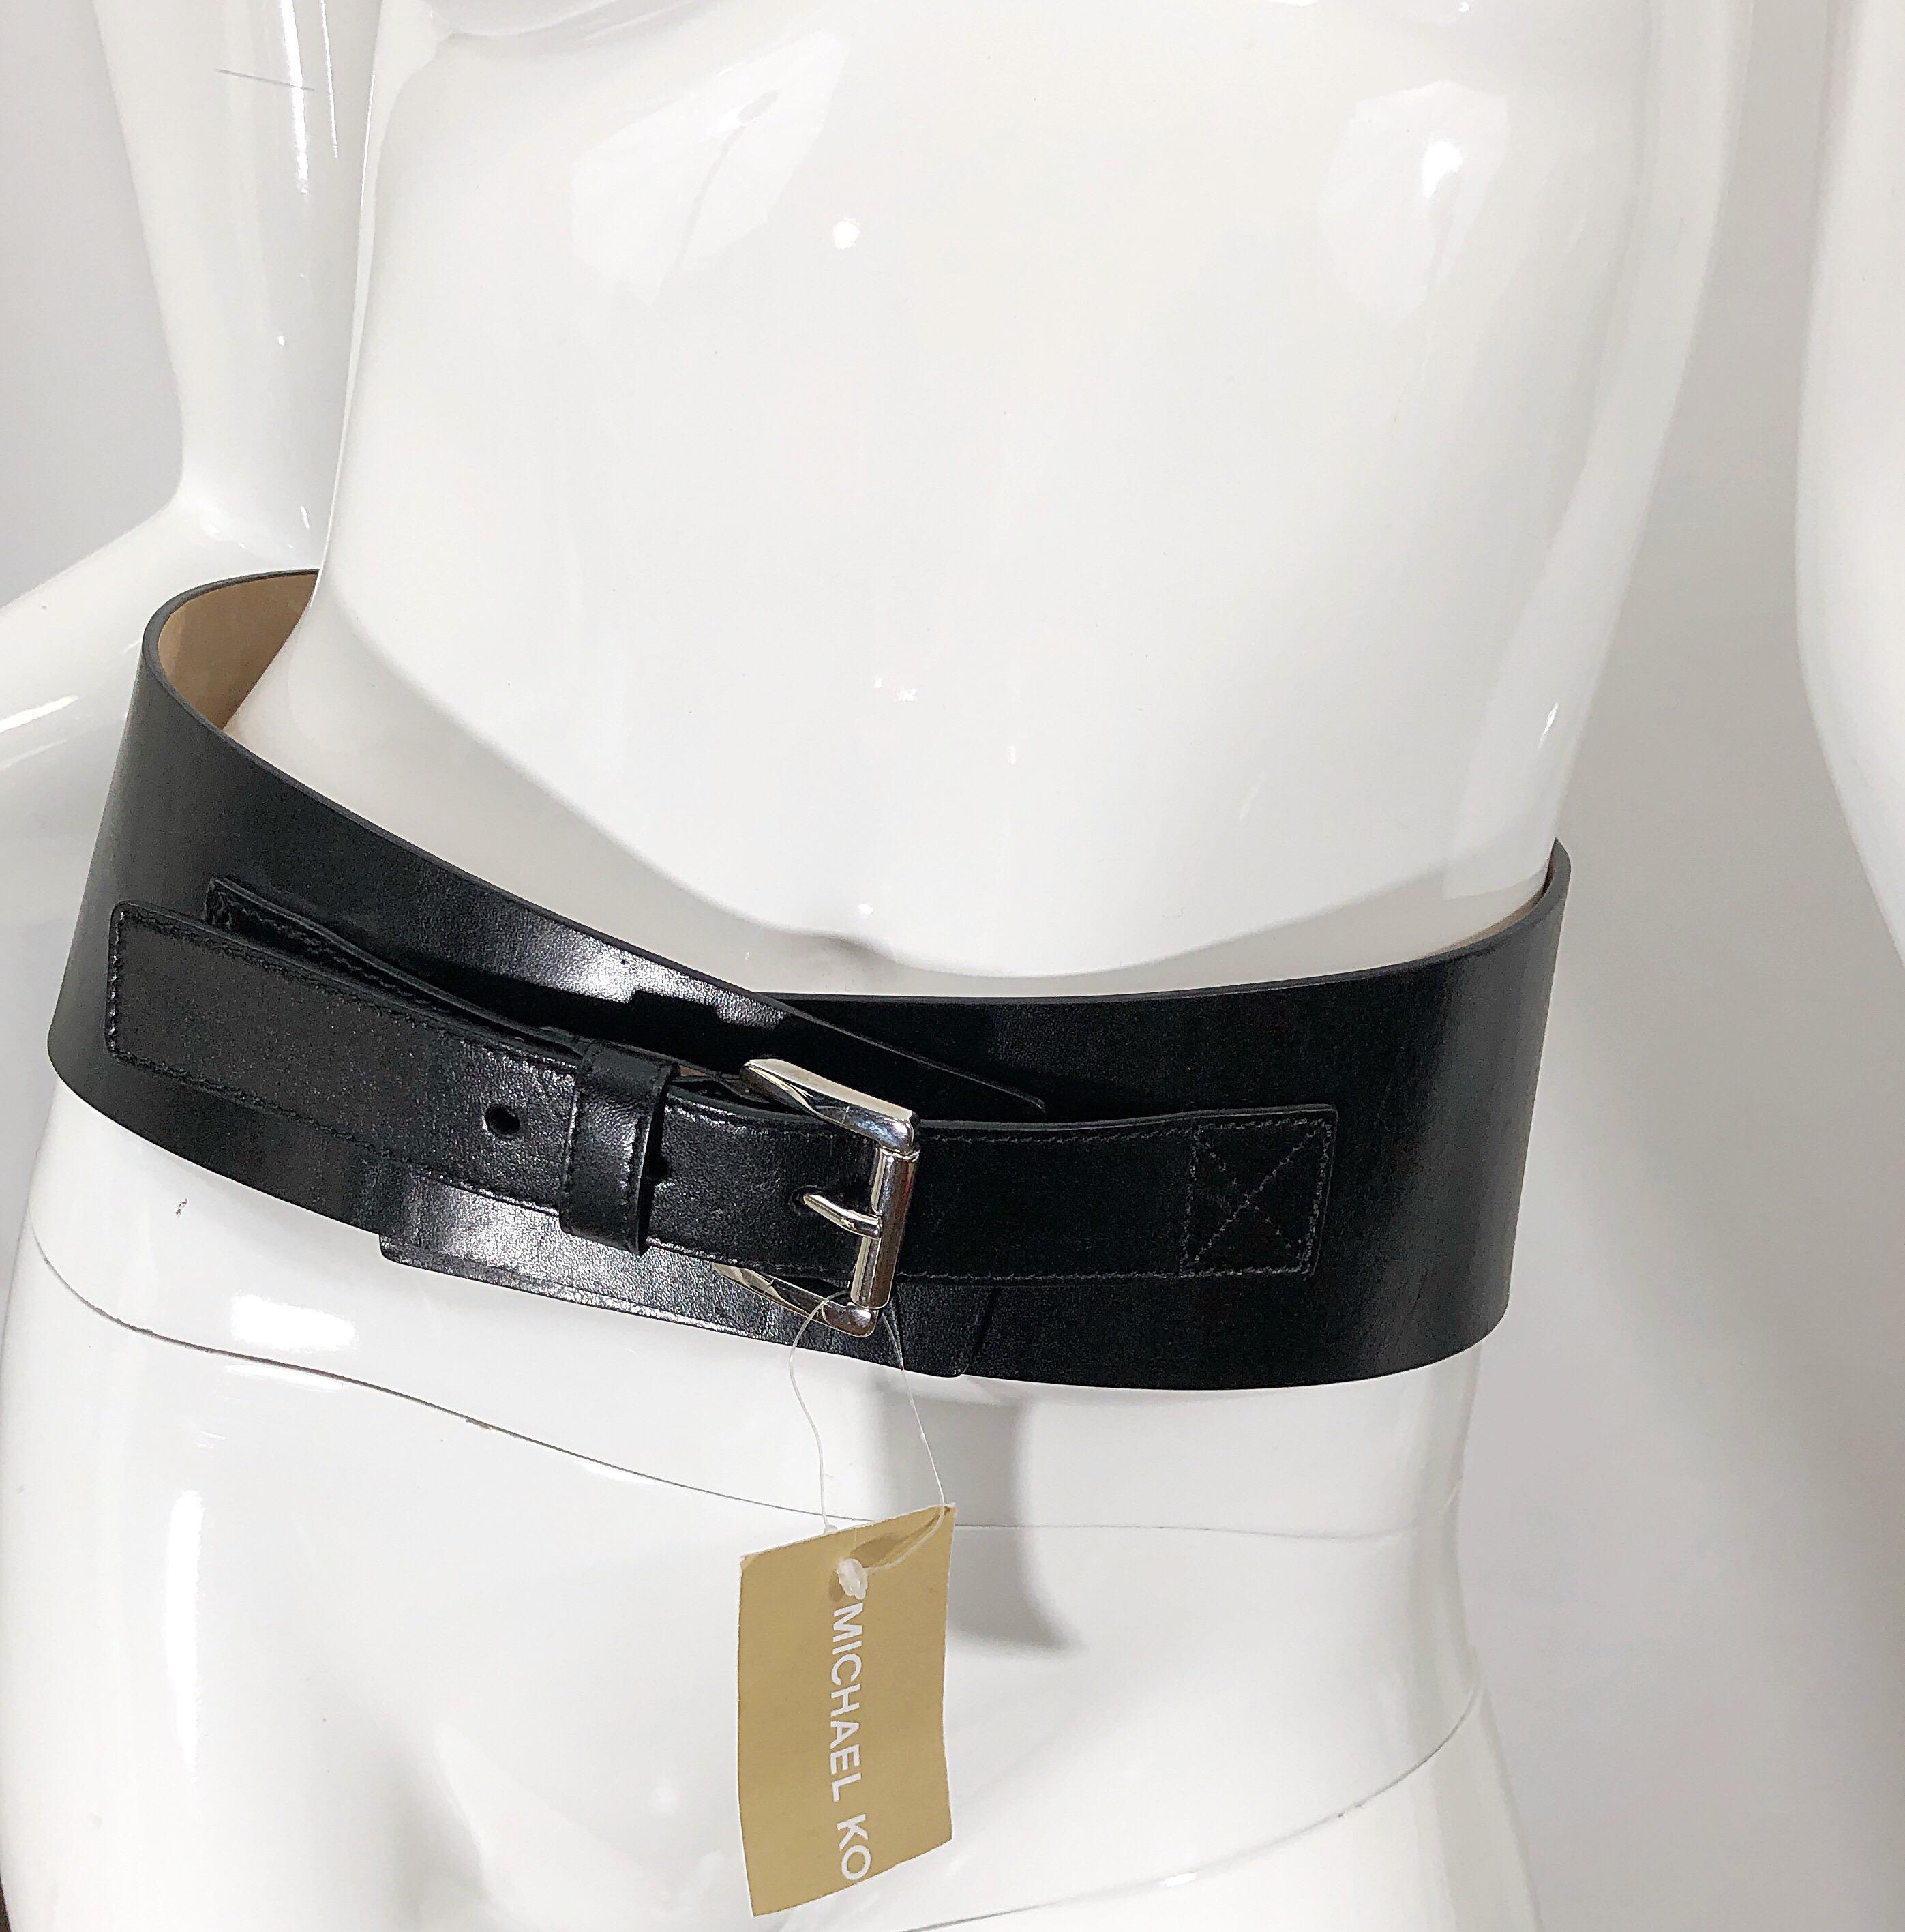 NWT Michael Kors Collection Size Large Black Leather Corset Style Waist Belt 4